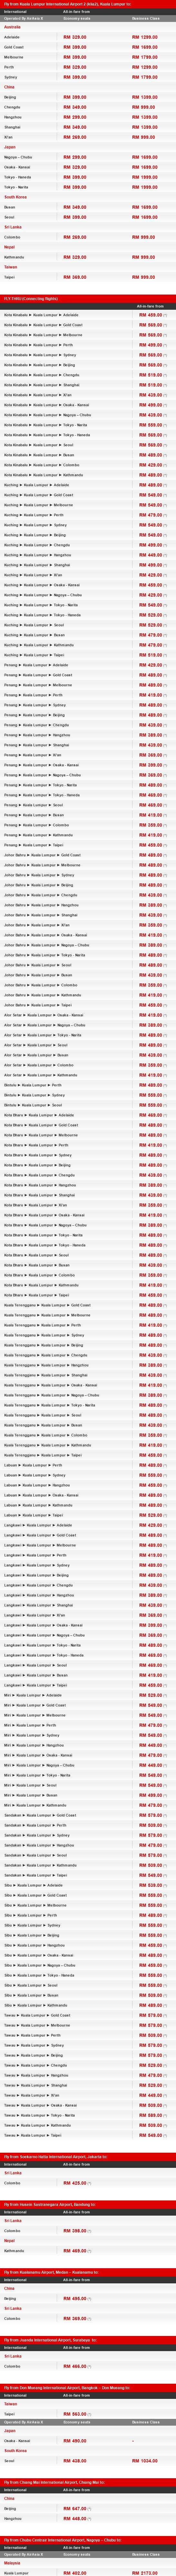 AirAsia X Raya For Everyone Promotion Fares Details